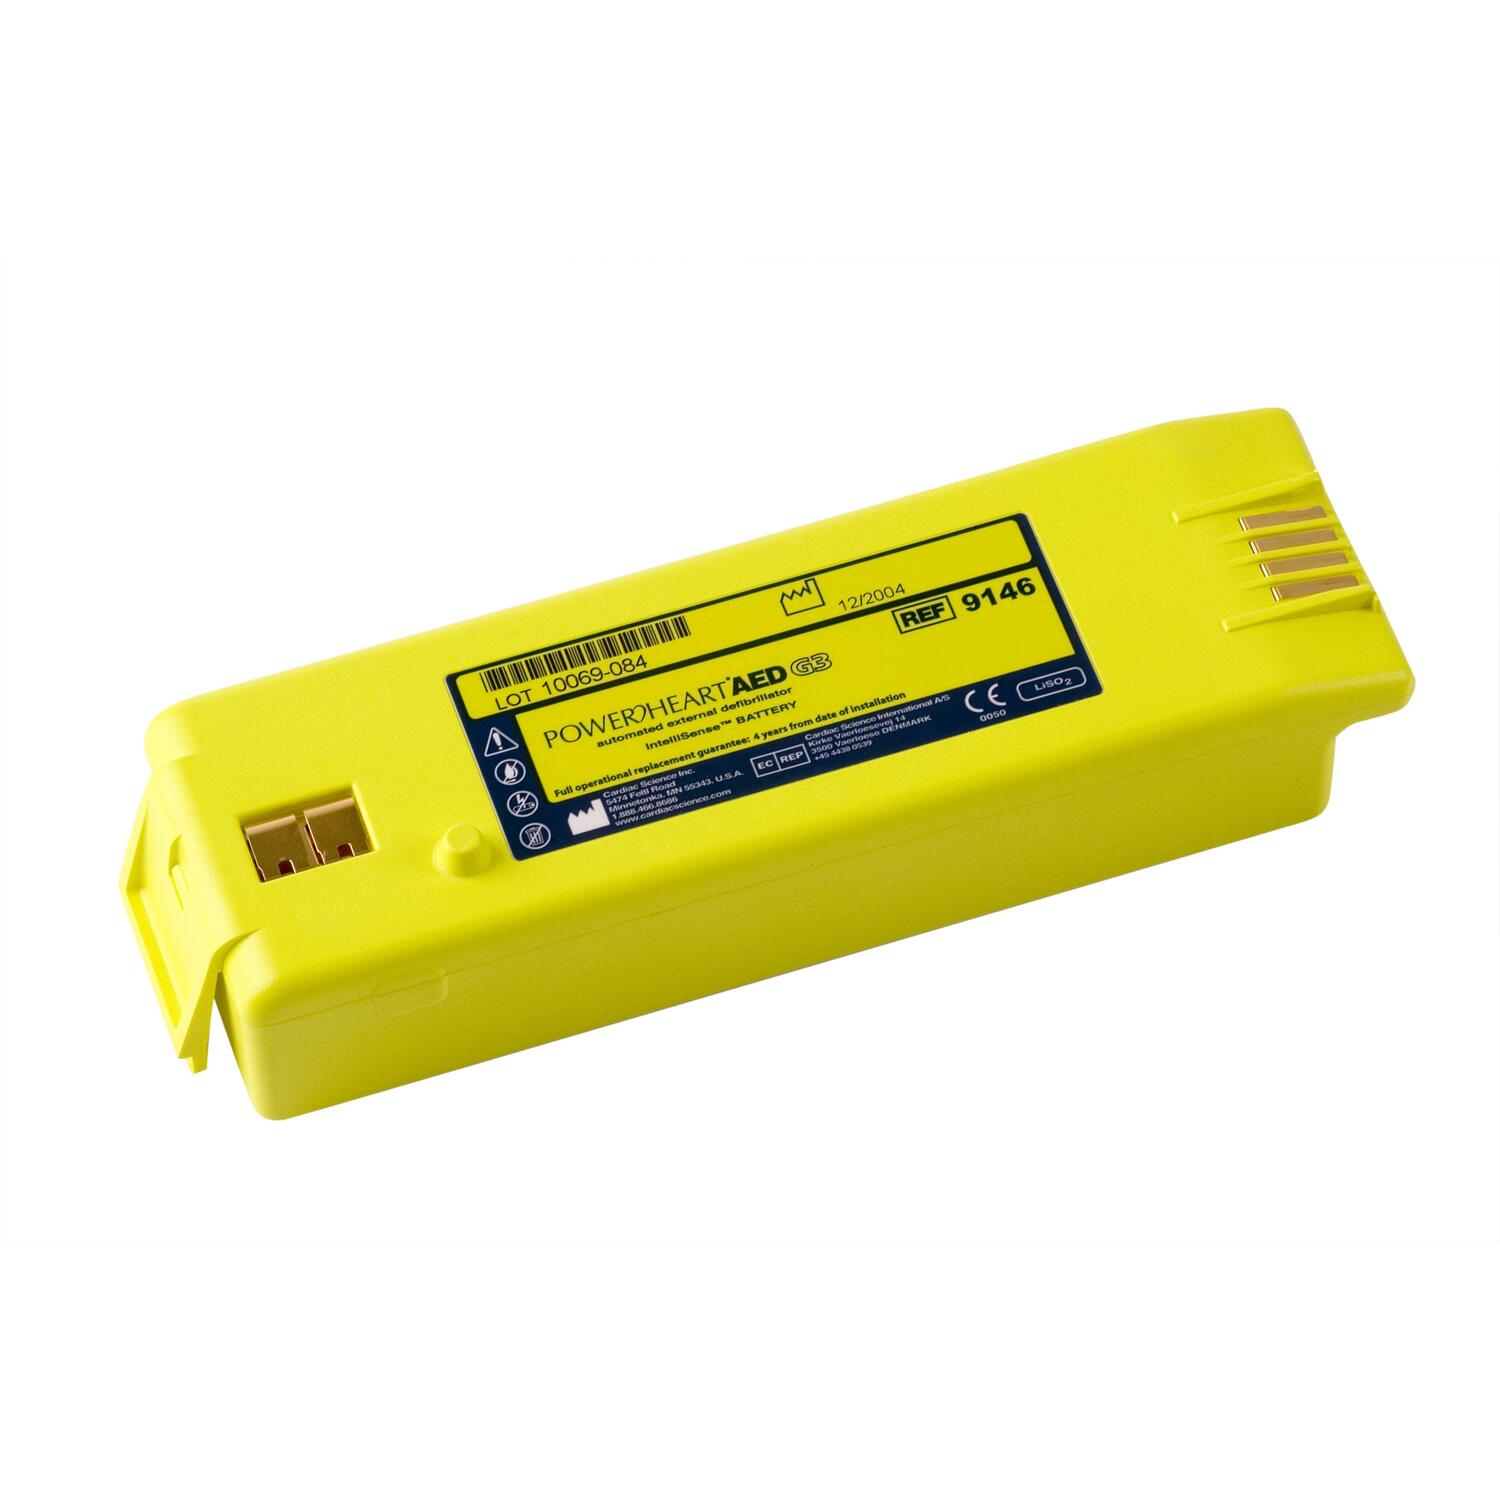 Medline 9300a9300e9390 Lithium Aed Battery